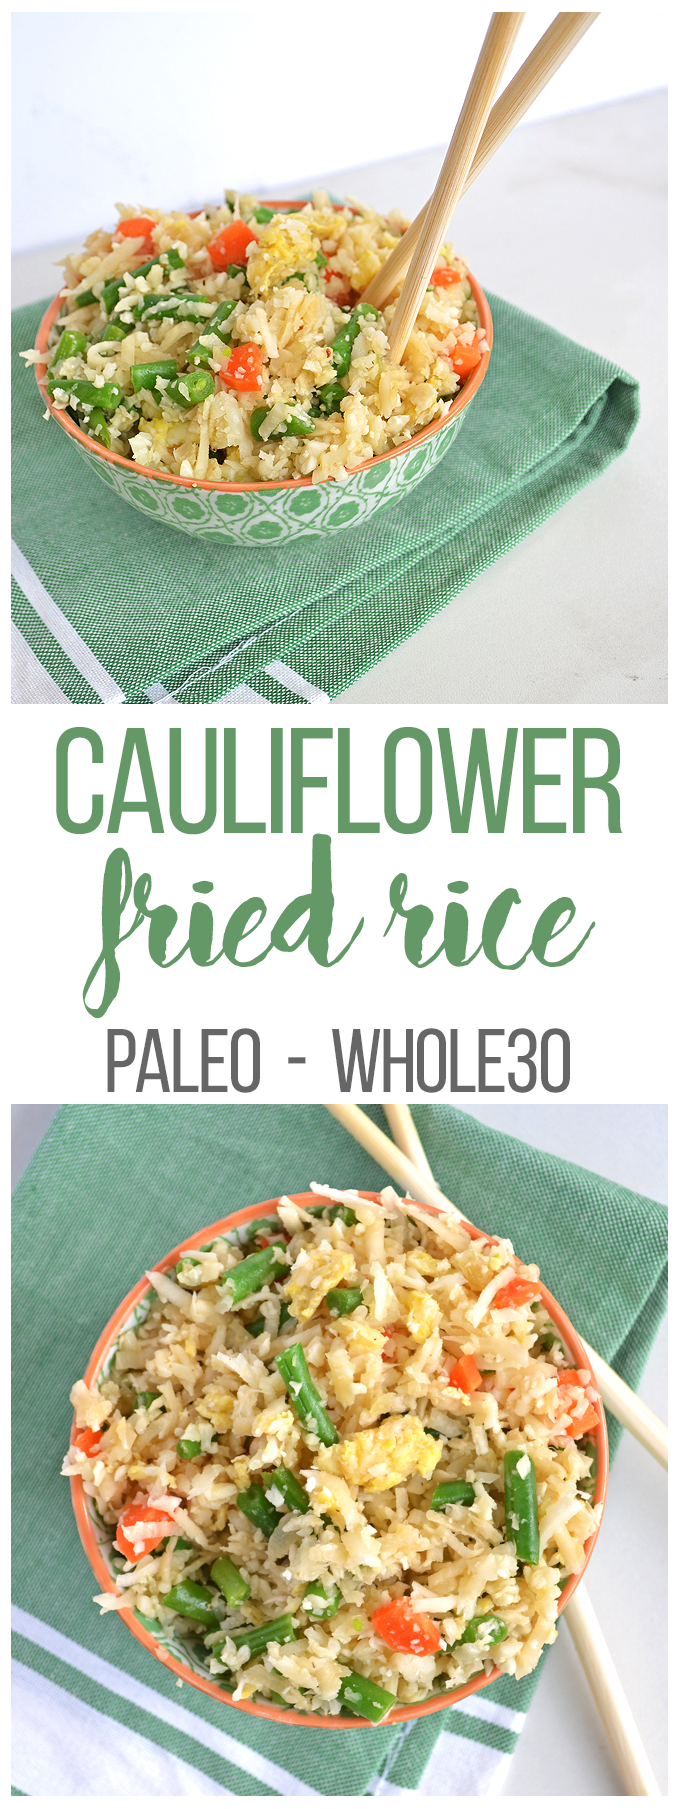 This Cauliflower Fried Rice is paleo & whole30 approved!! Super quick to throw together - click through for a video!